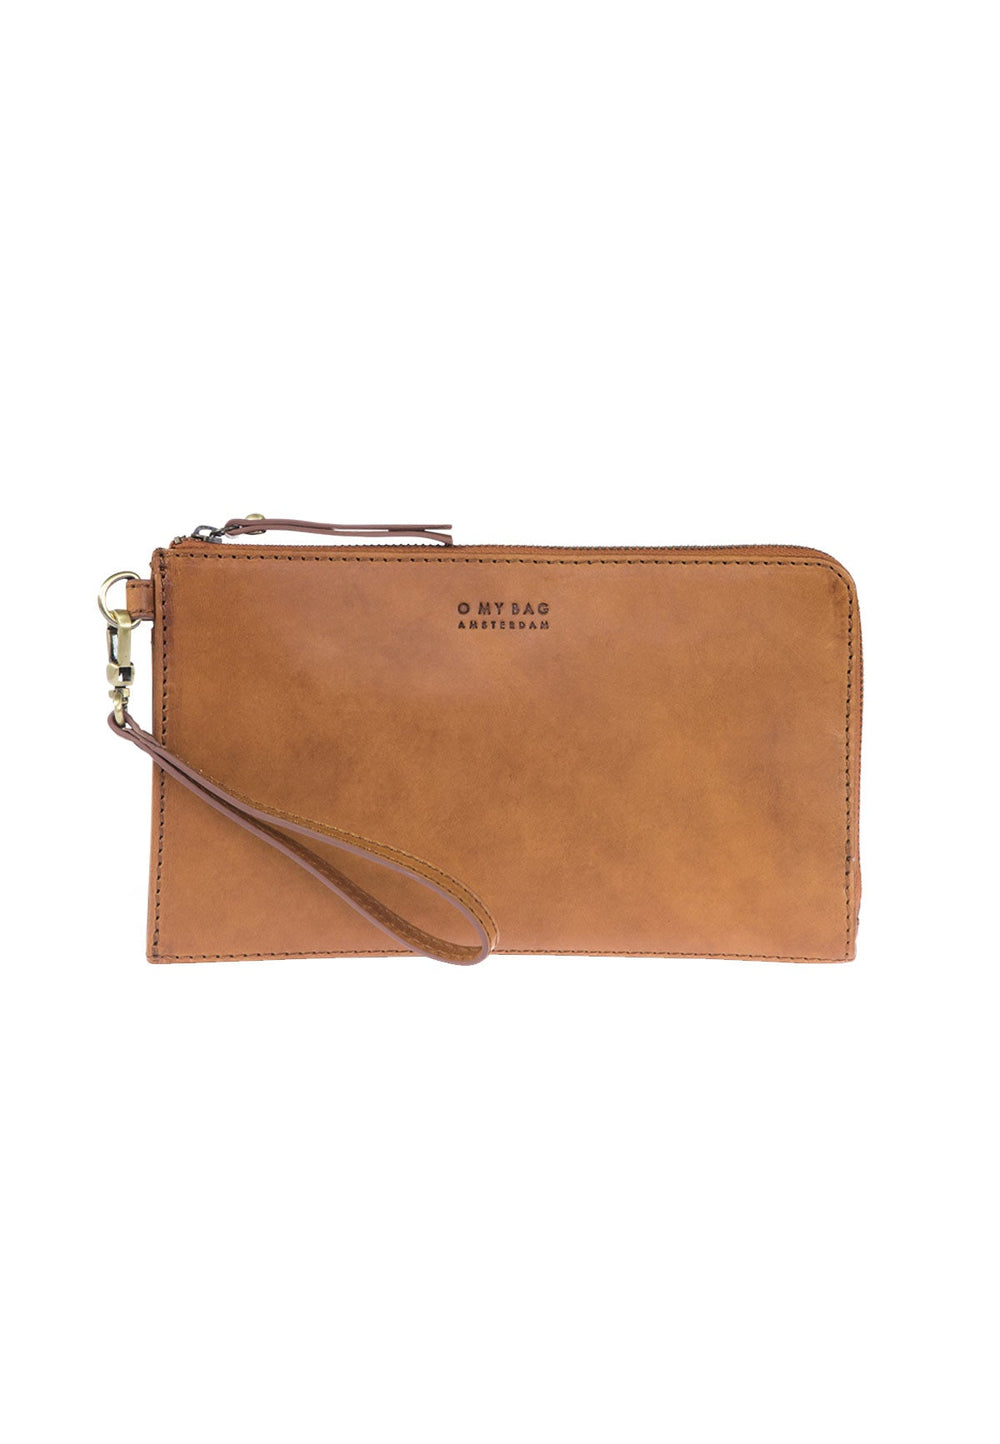 TRAVEL POUCH COGNAC CLASSIC LEATHER – Moeon